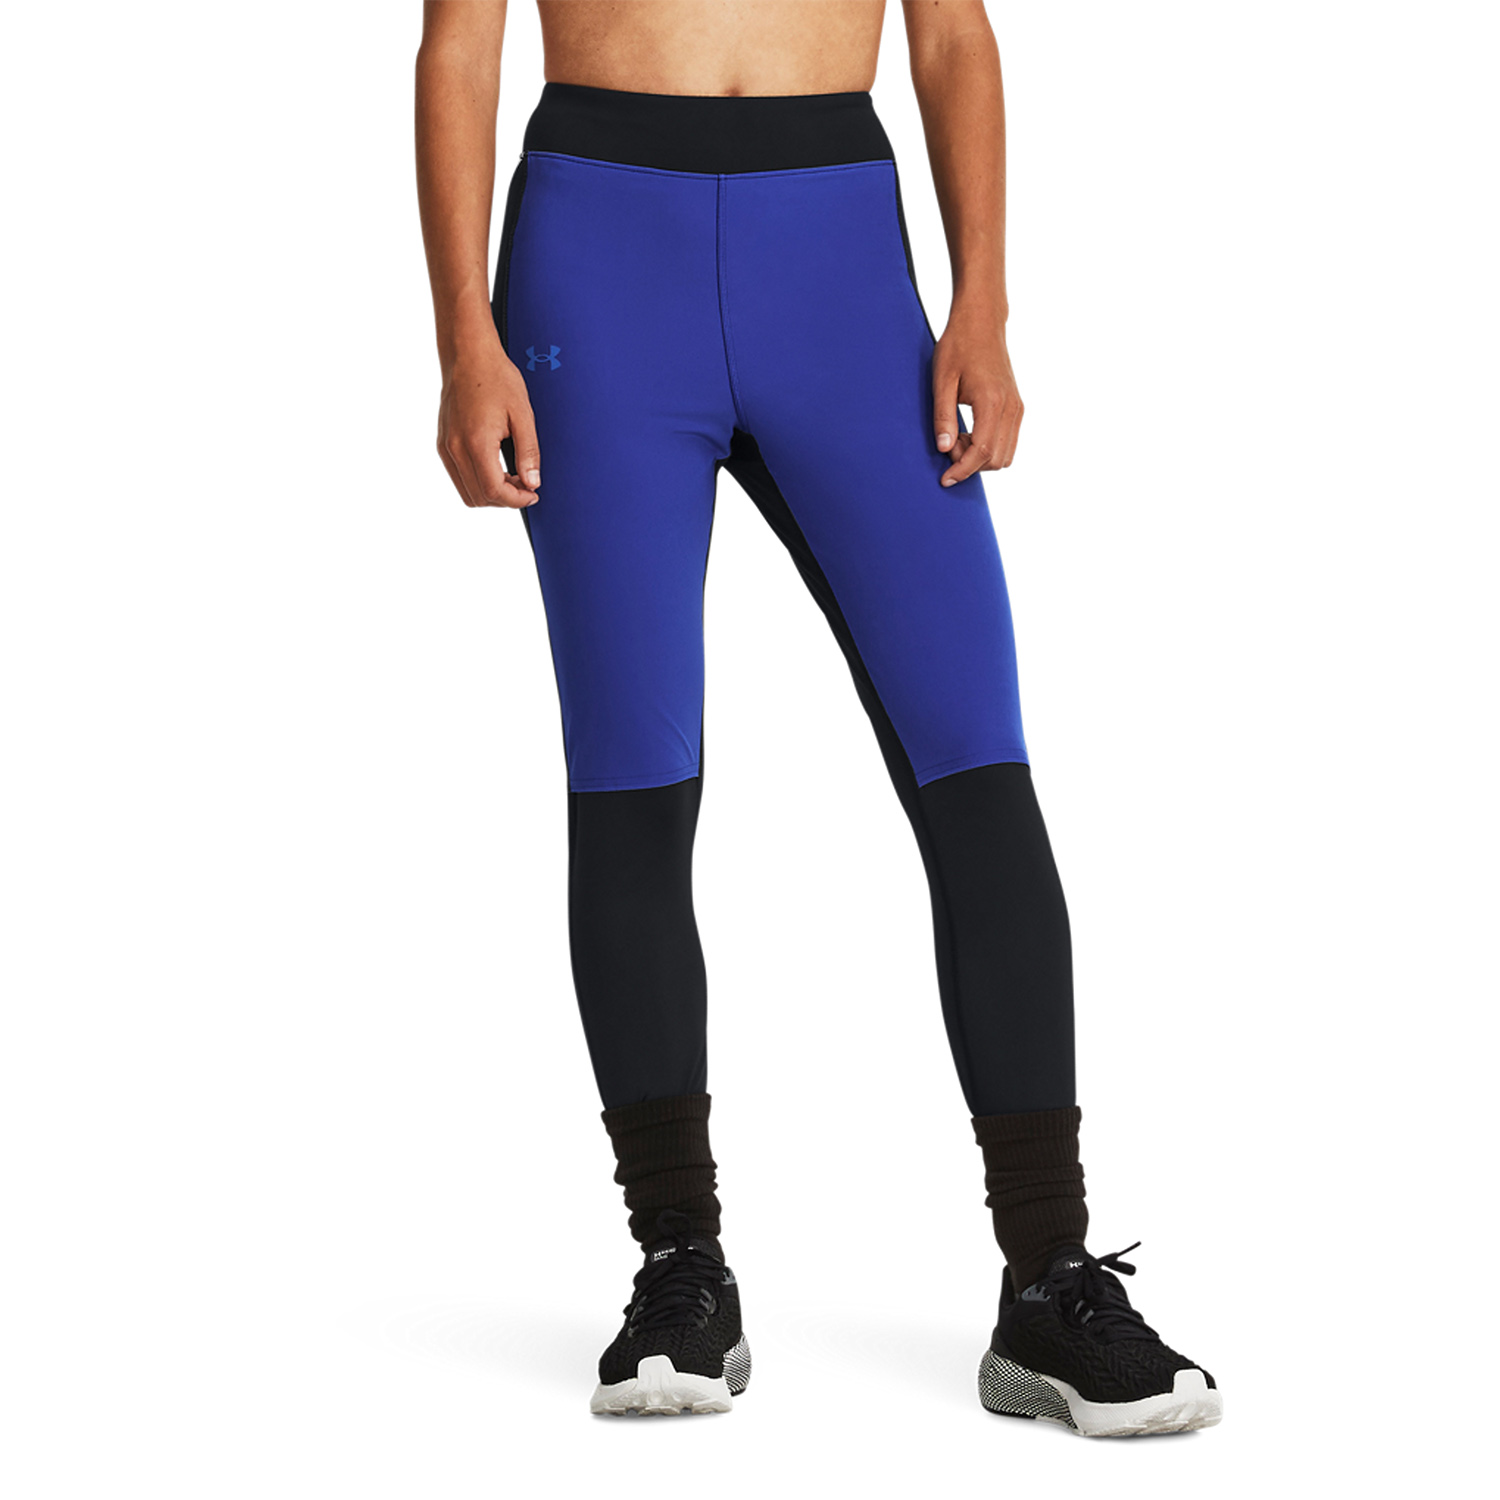 Under Armour Qualifier Cold Tights - Black/Team Royal/Reflective